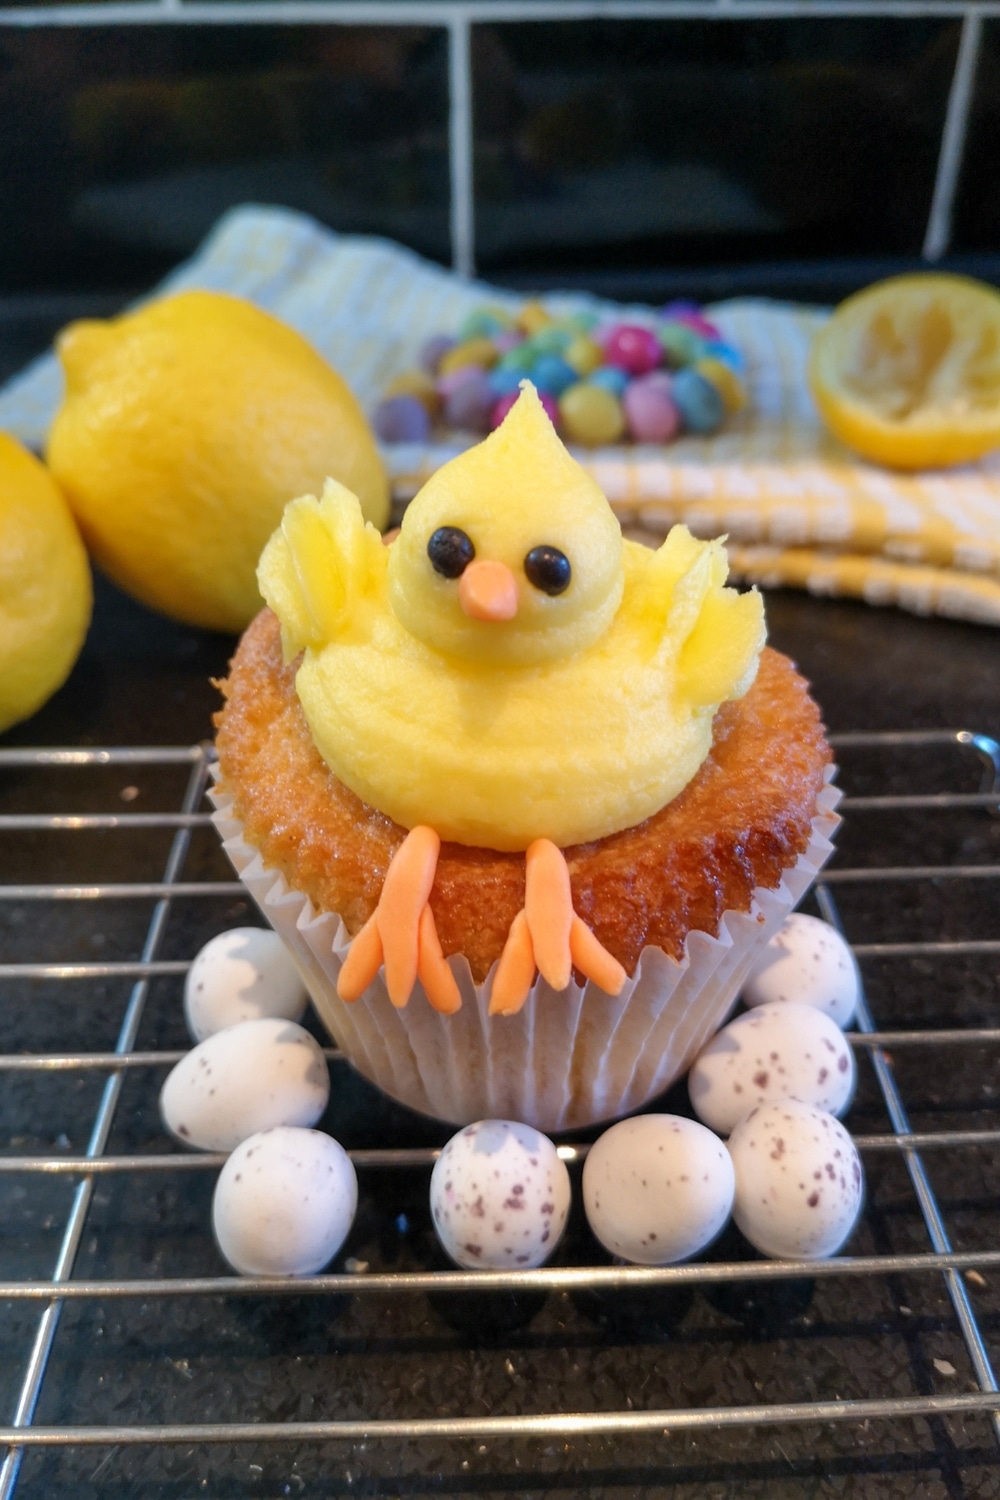 Cute Easter Chick Cupcakes Recipe - a vanilla cupcake with a lemon buttercream frosting shaped as a baby chick